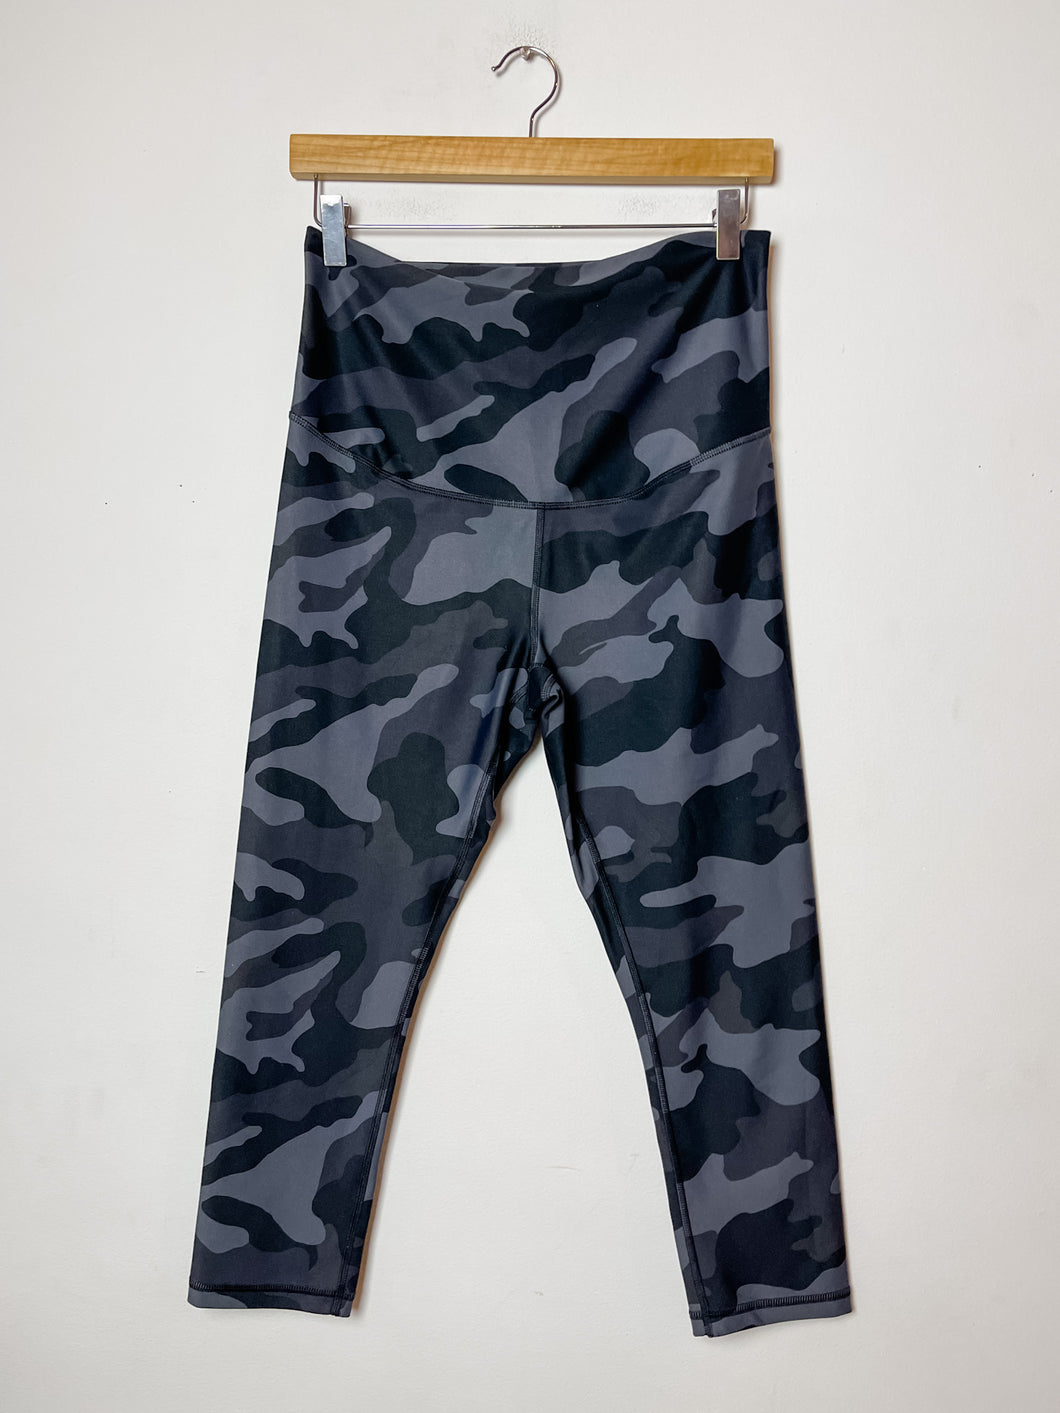 Camo Old Navy Maternity Cropped Leggings Size Small